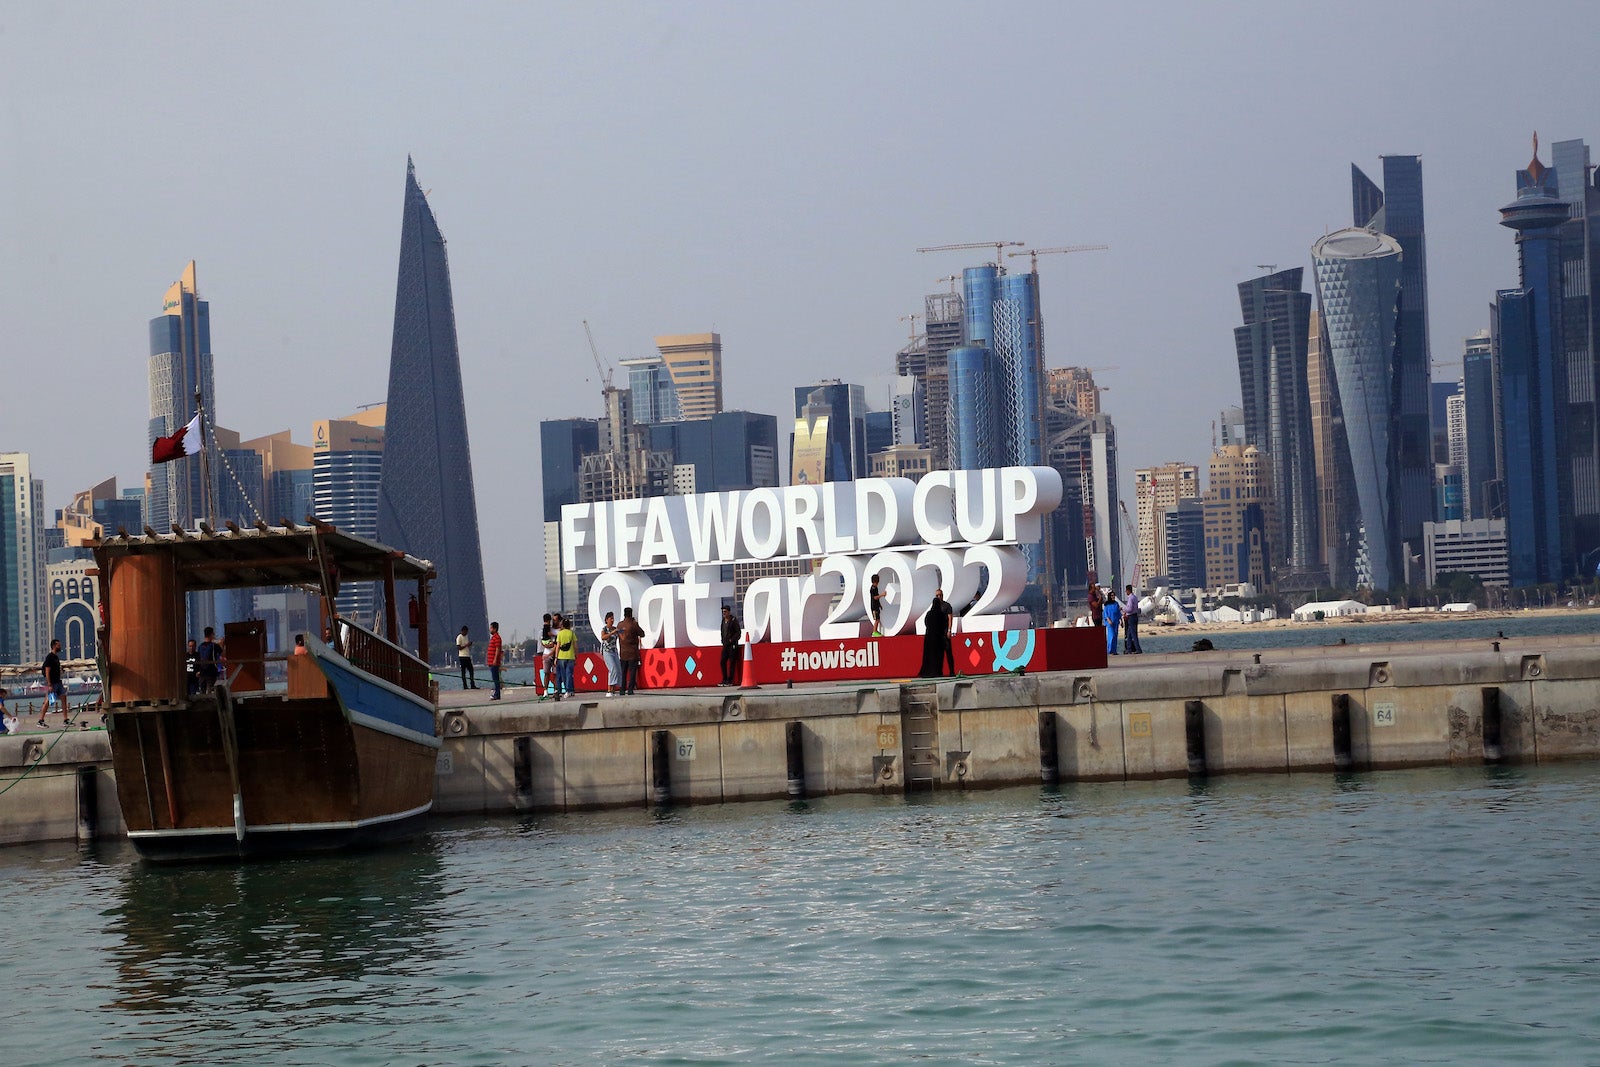 Preparations for FIFA 2022 are completed in Qatar